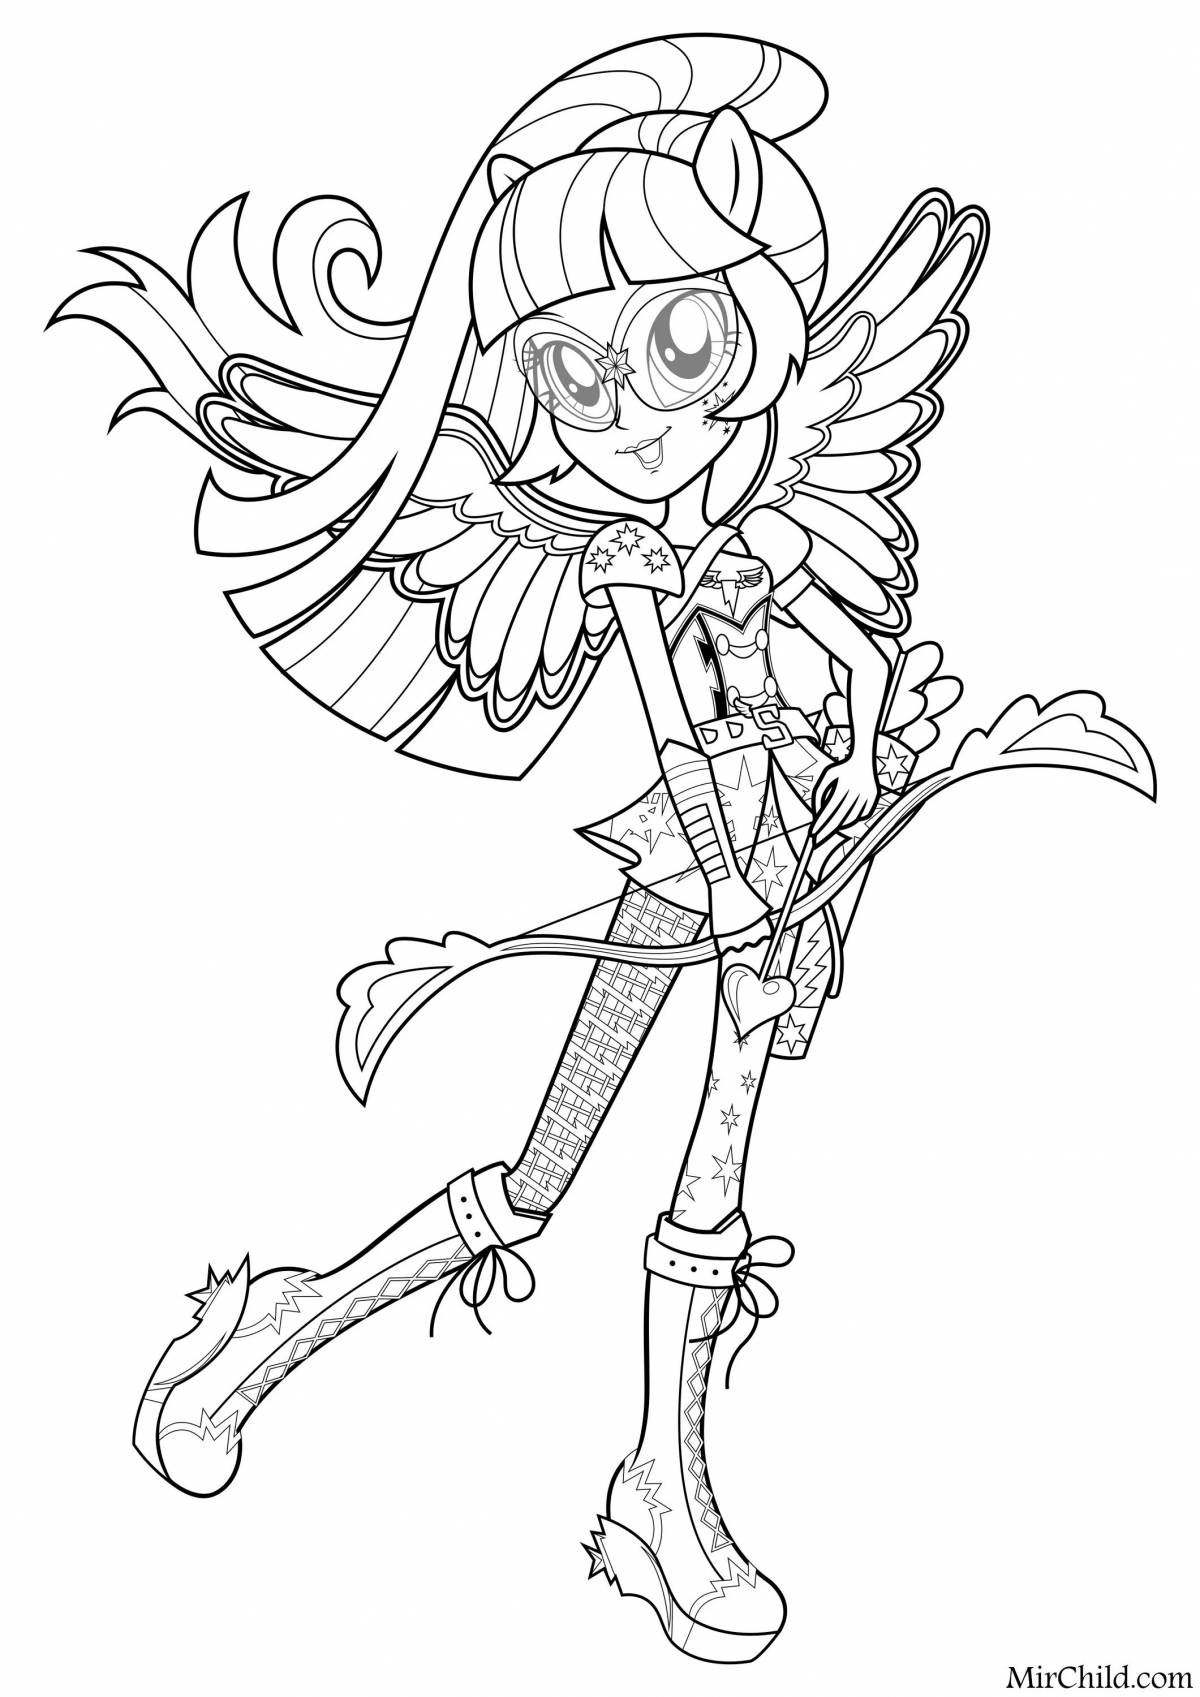 Coloring page fairy girl from equestria sparkle